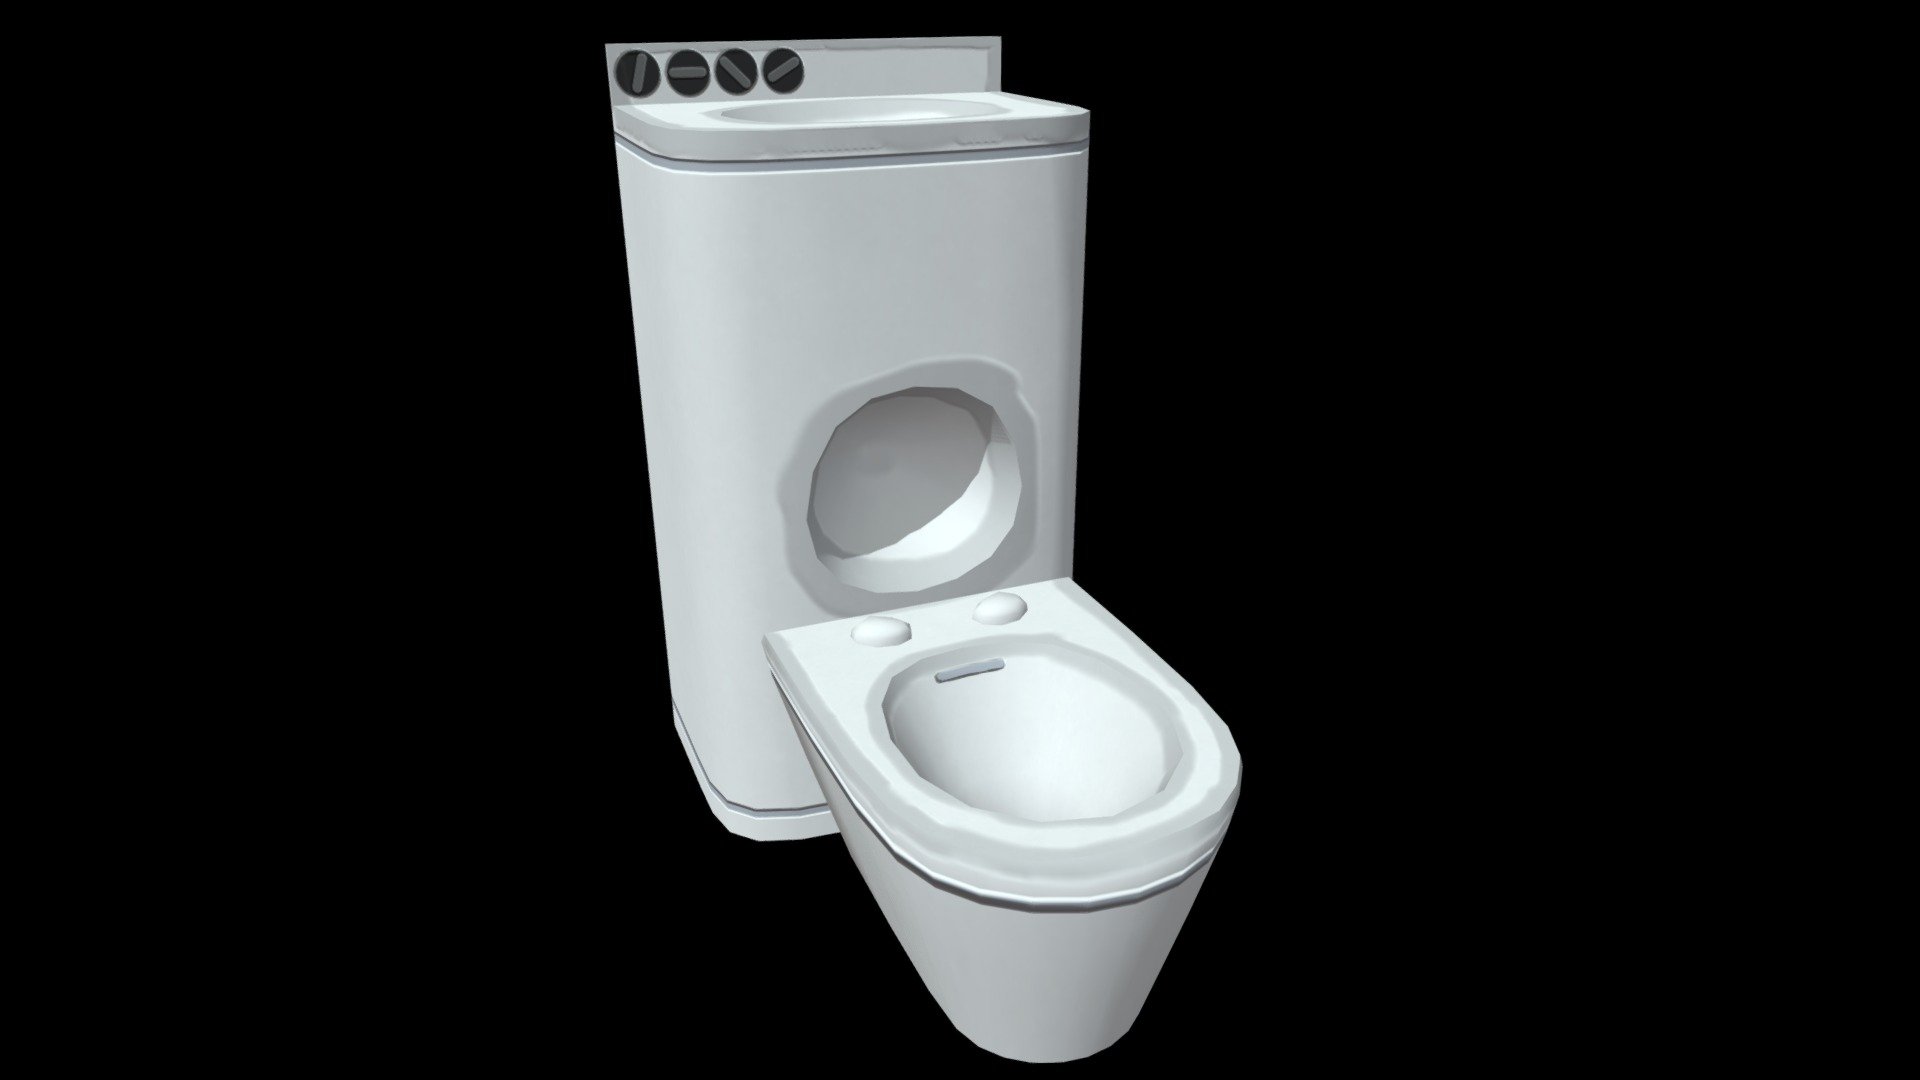 Prison Toilet from my GameJam Project, Solitude

Itch.Io Link for Solitude - https://yaseen-ali777.itch.io/solitude - Prison Toilet - 3D model by Yaseen Ali (@yaseen_ali777) 3d model